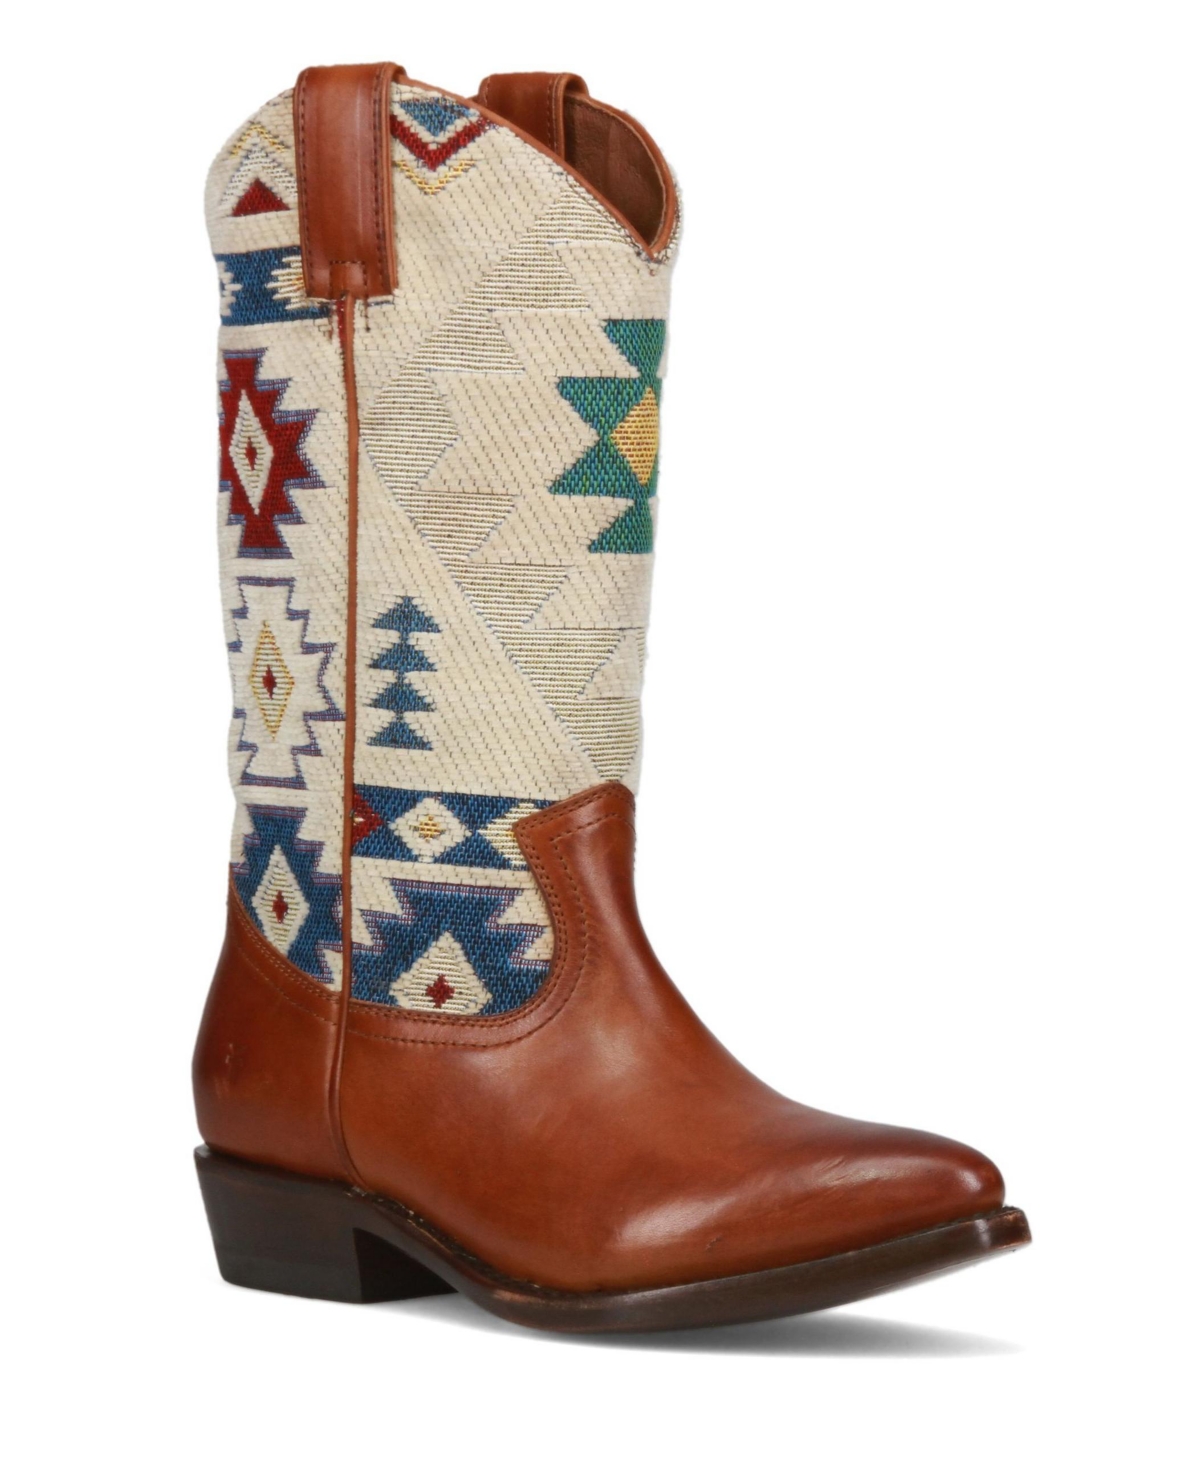 Women's Billy Western Fabric Leather Boots - Caramel Southwest Print